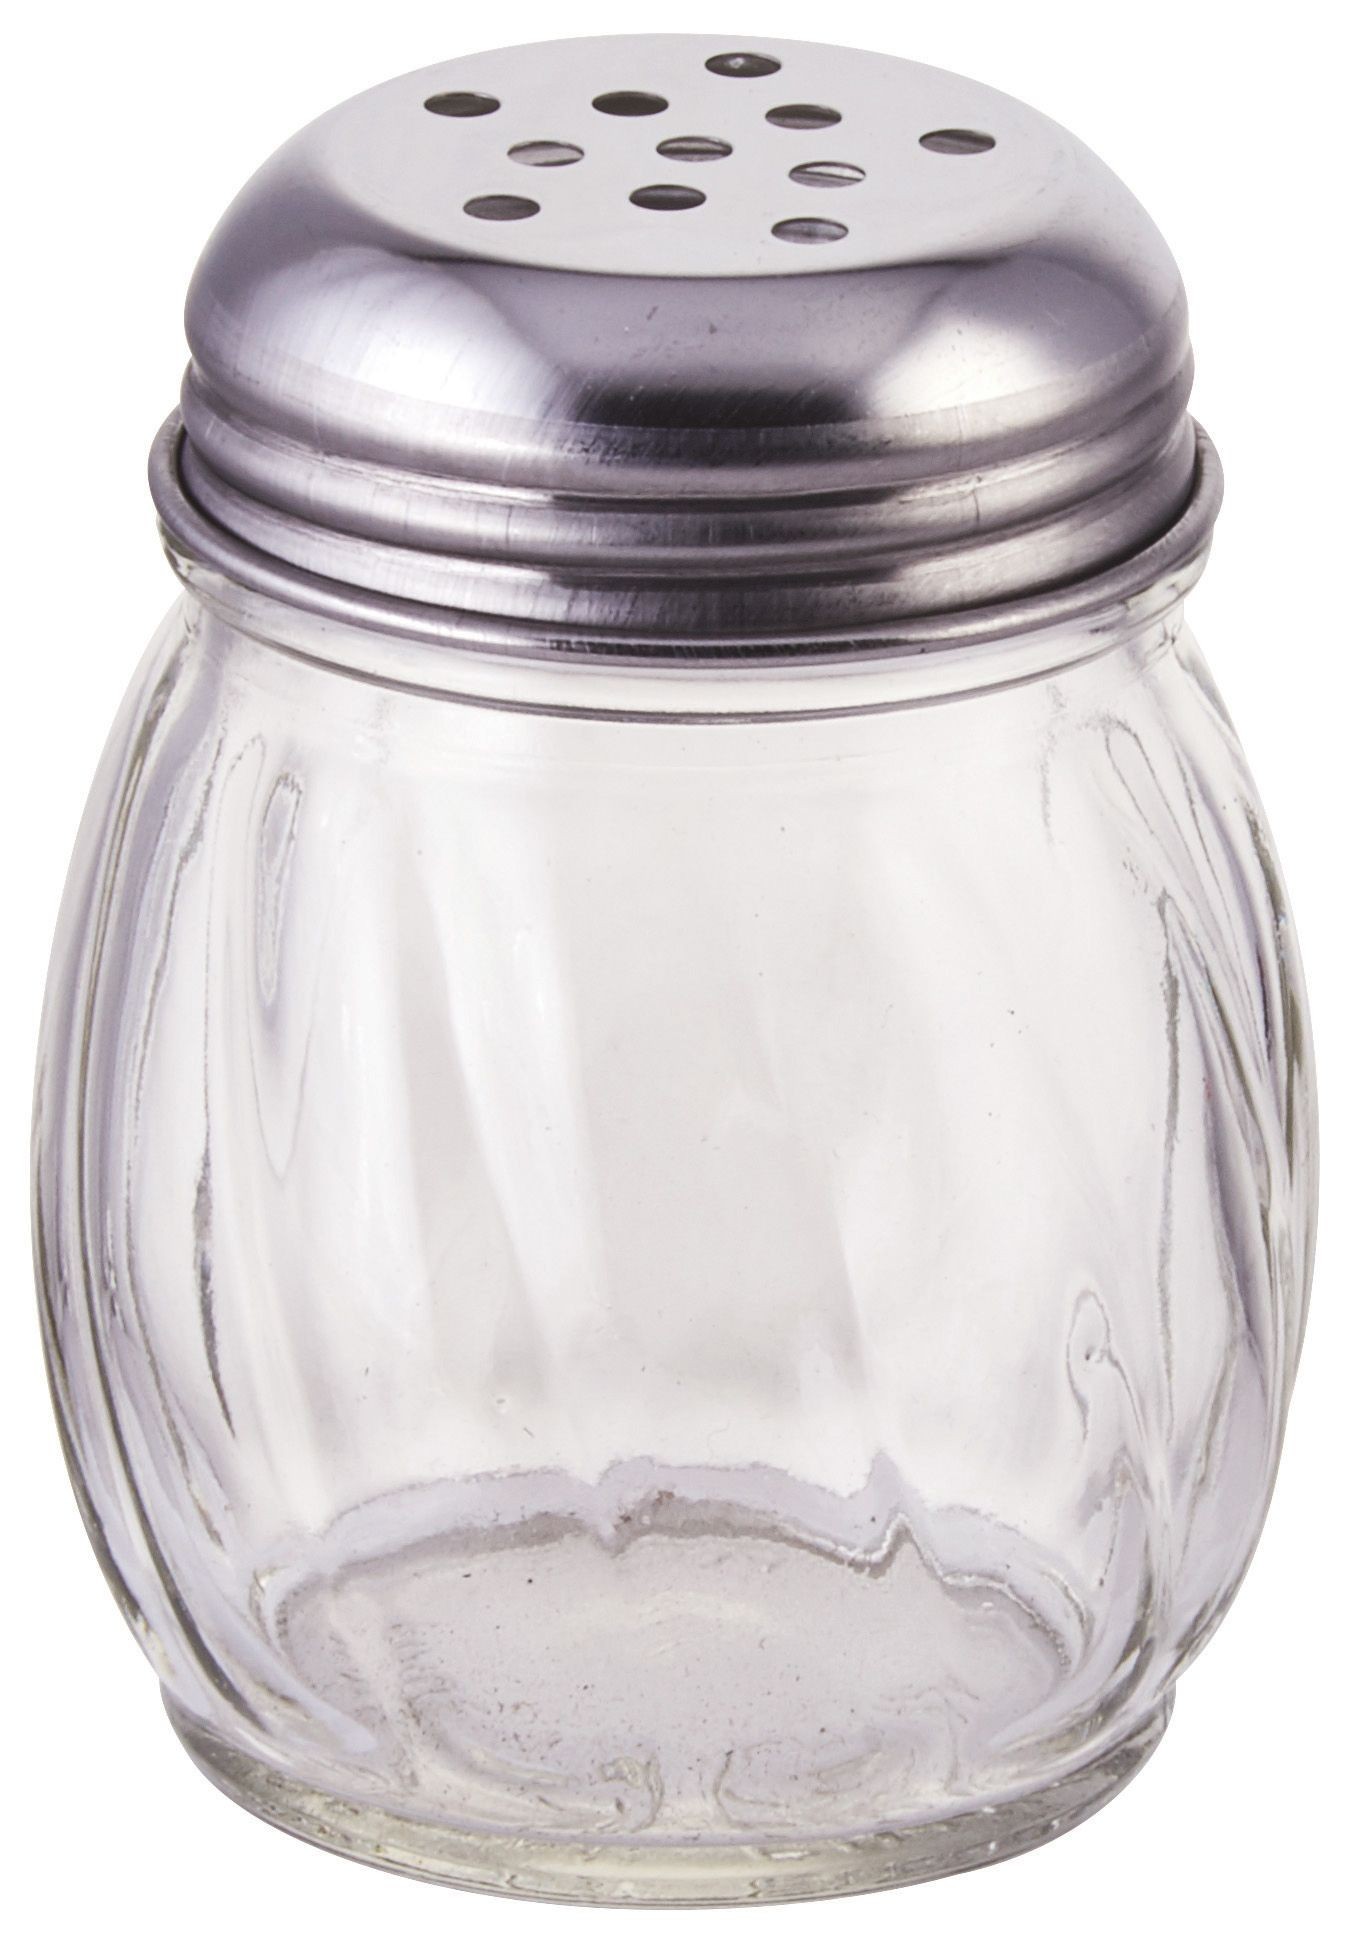 Winco G-107 Cheese Shaker 6 oz. with Perforated Top